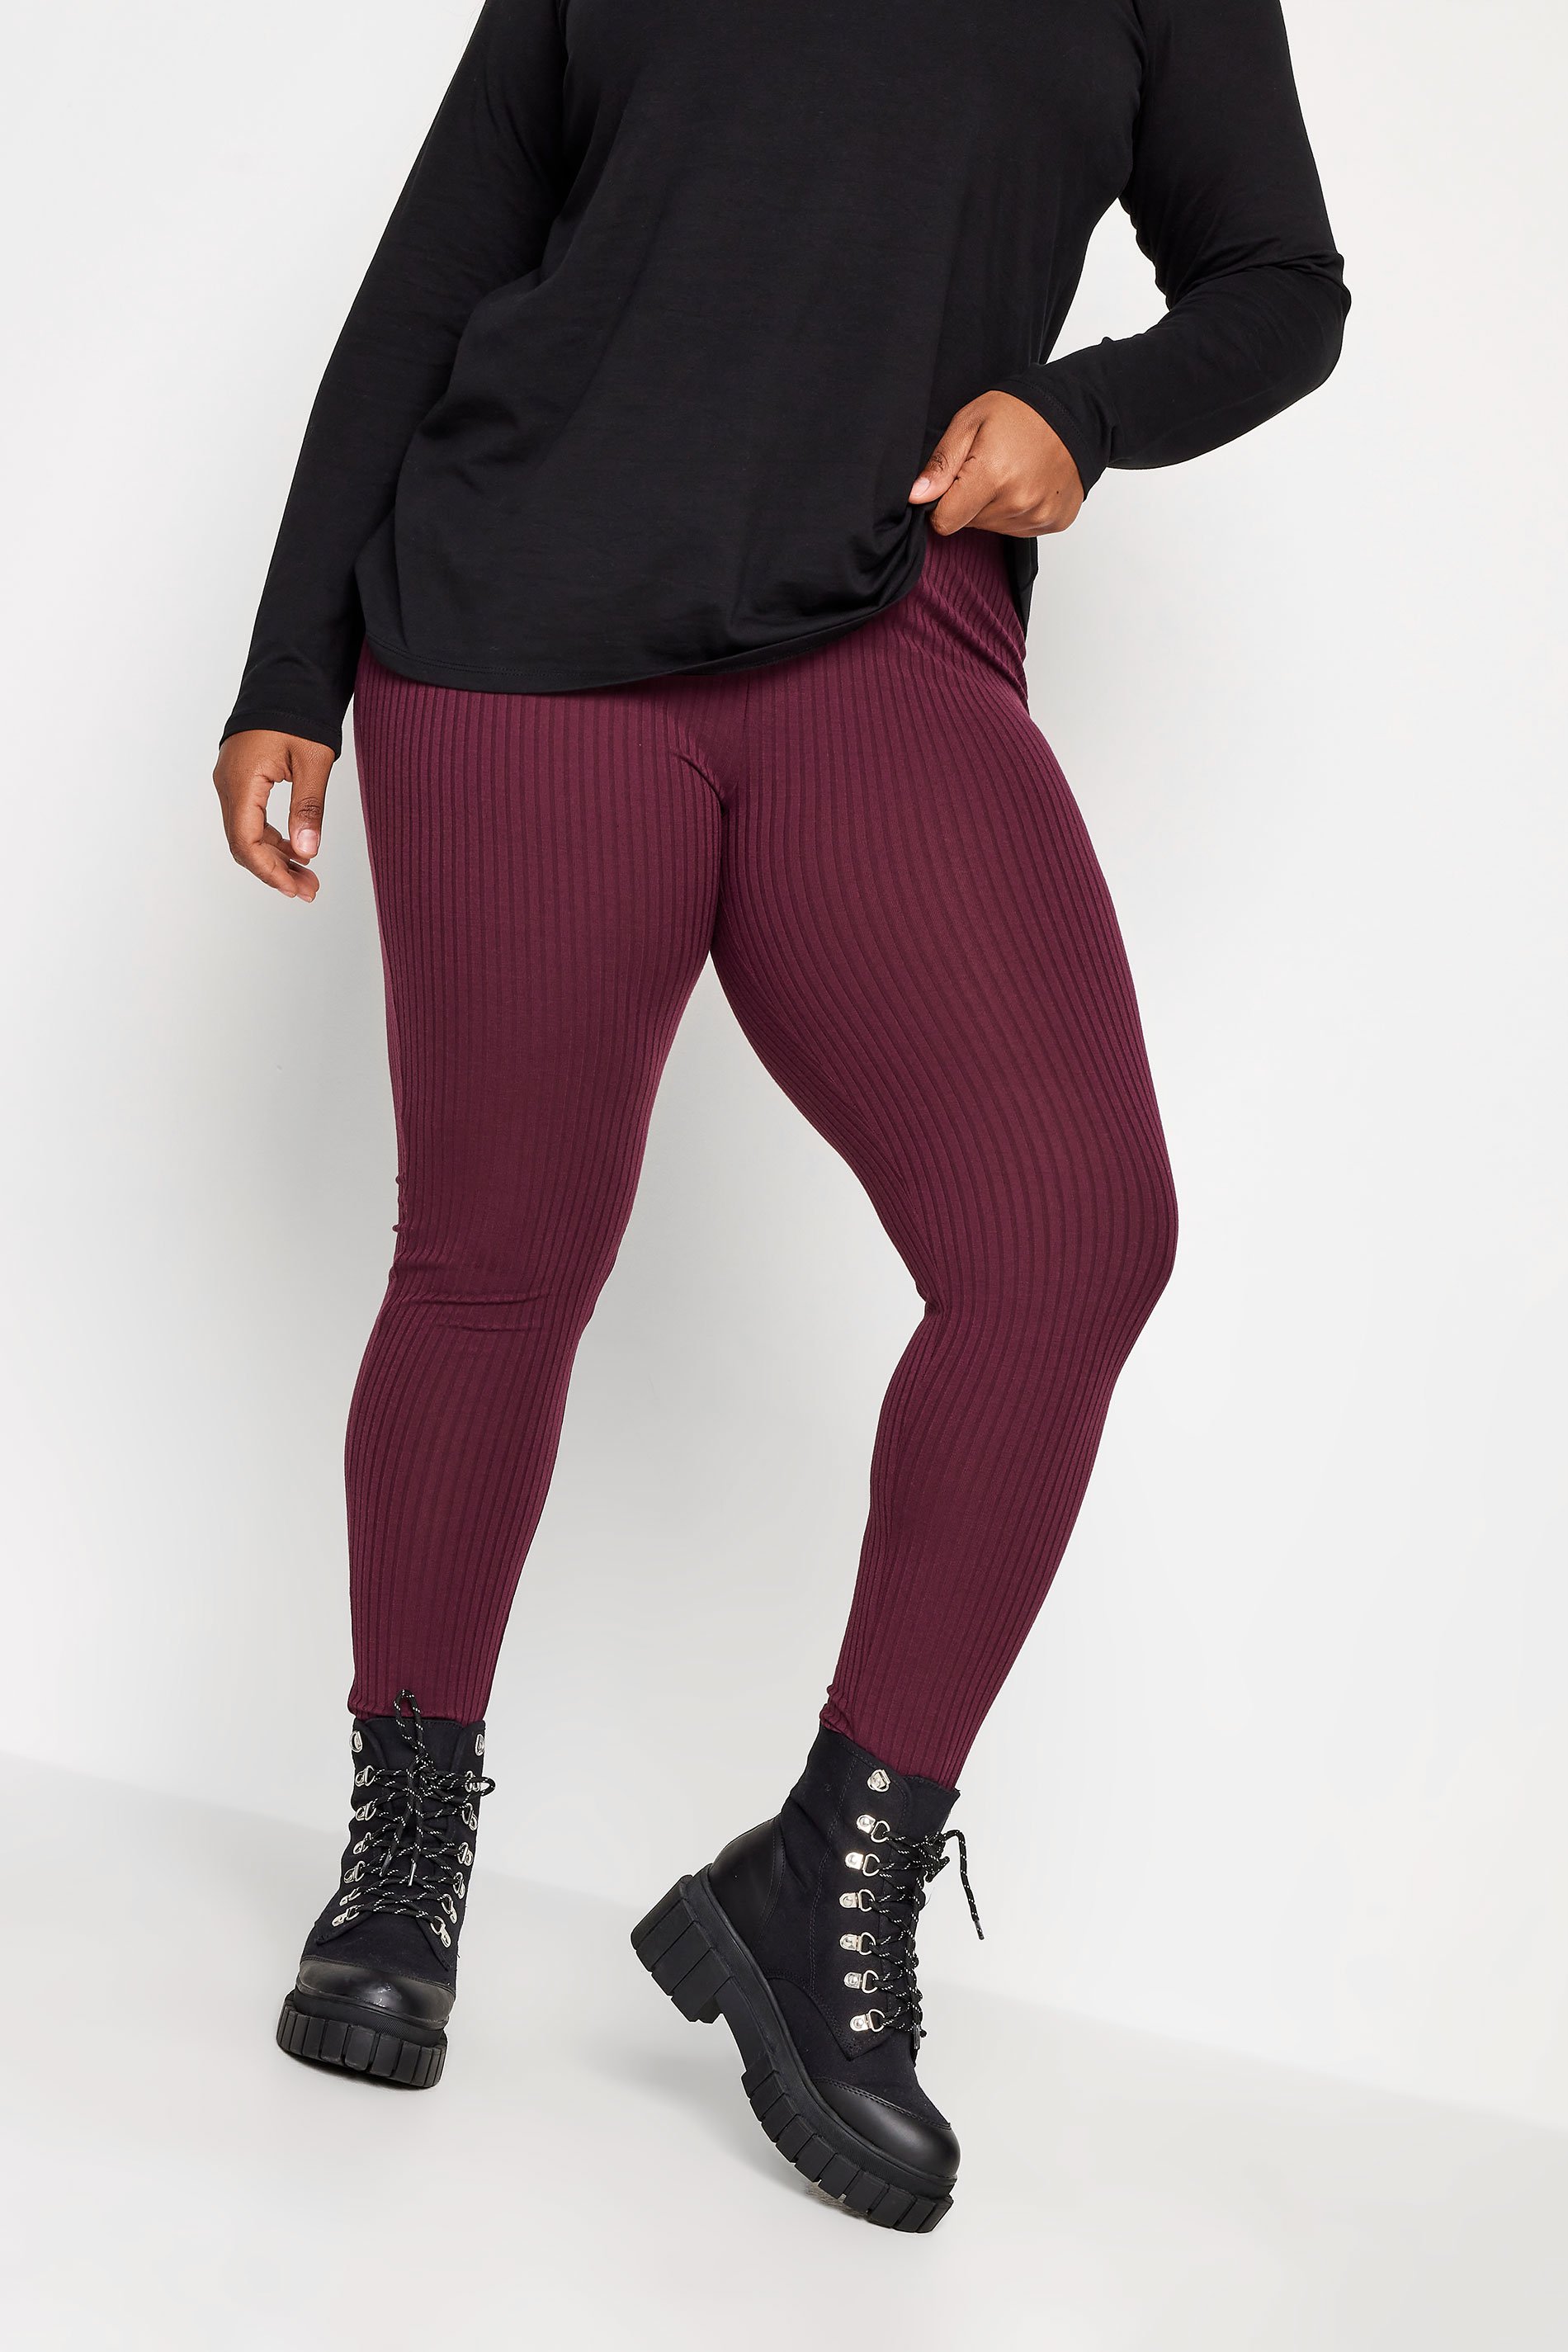 https://cdn.yoursclothing.com/Images/ProductImages/4687055c-723d-46_143559_A.jpg